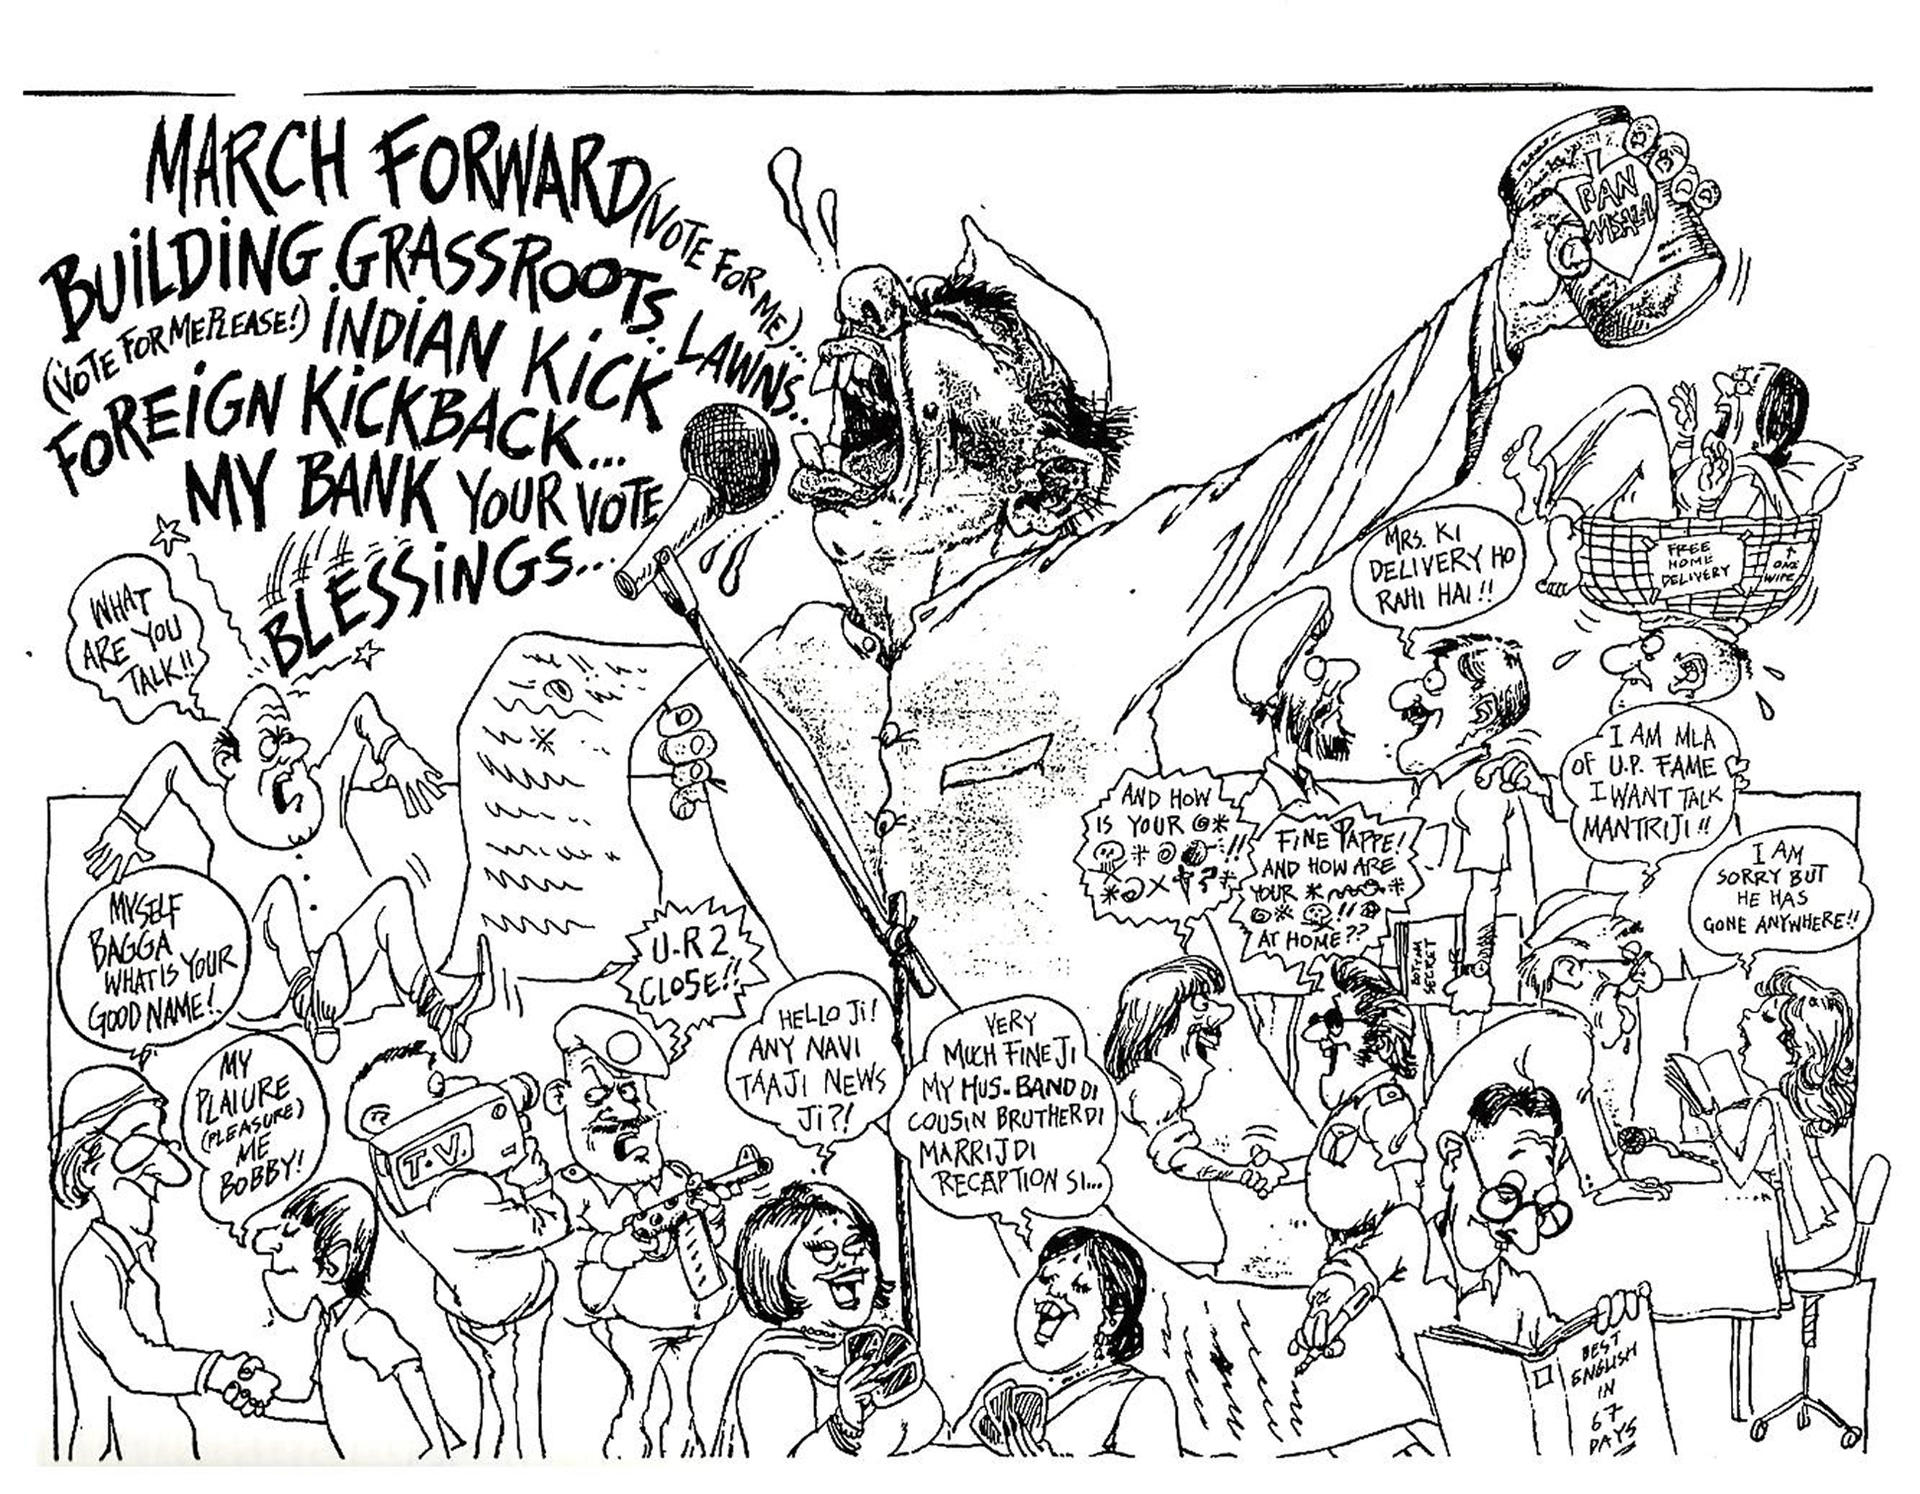 A cartoon from an Indian newspaper, circa 1990s, pointing to various pidginized Englishes that have emerged in the decades since independence